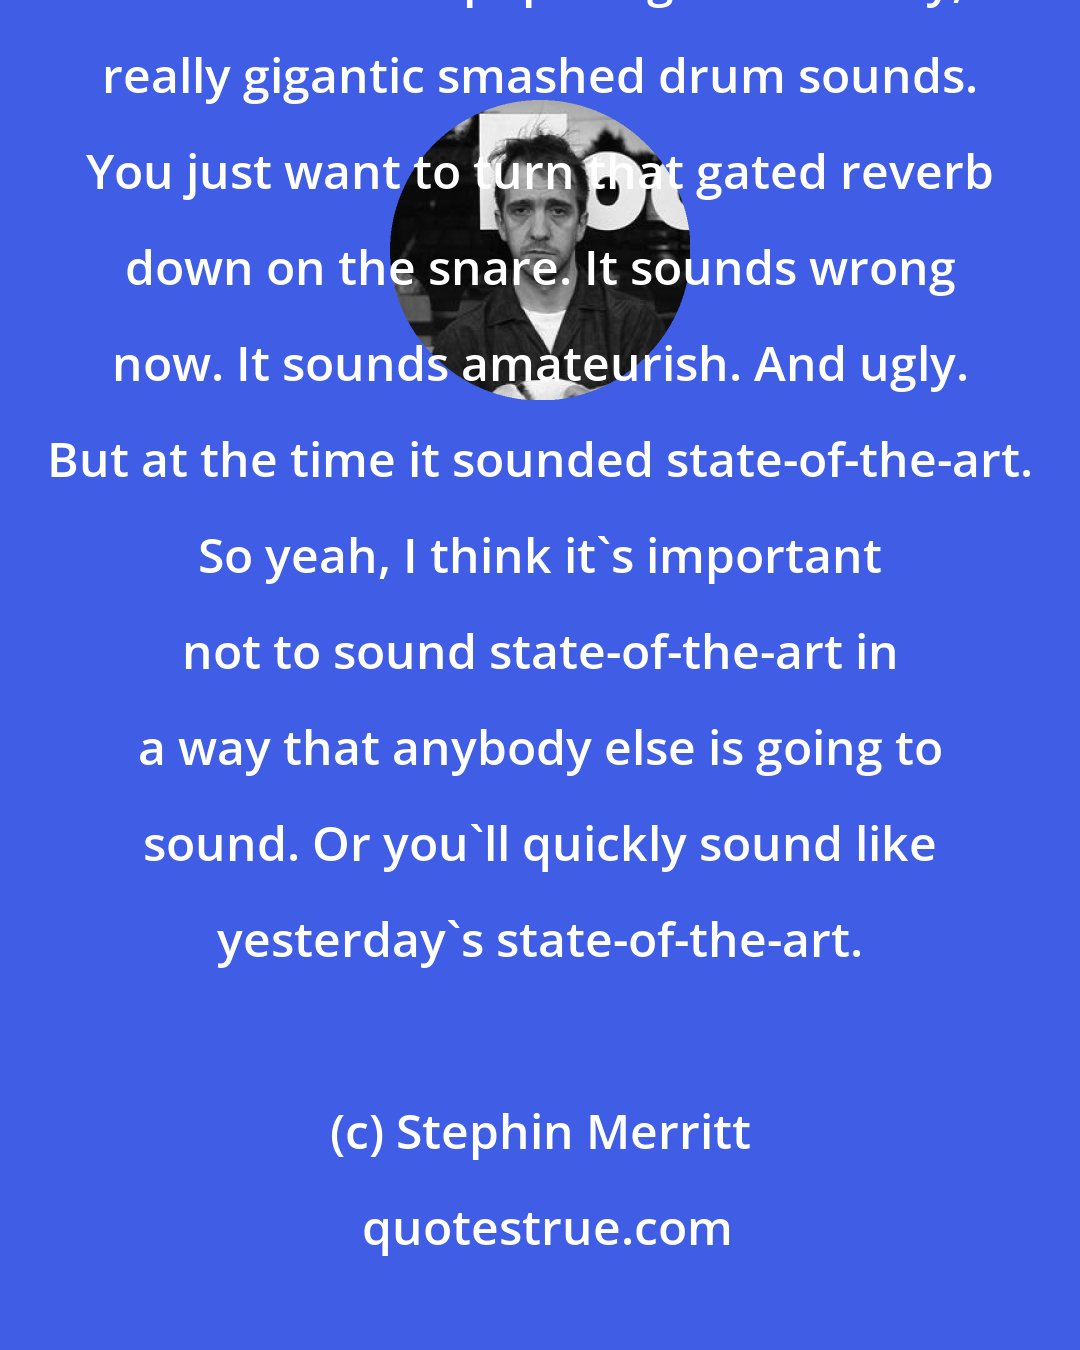 Stephin Merritt: Well, things hold up even if they sound dated. It can be very difficult to listen to 80s pop songs with really, really gigantic smashed drum sounds. You just want to turn that gated reverb down on the snare. It sounds wrong now. It sounds amateurish. And ugly. But at the time it sounded state-of-the-art. So yeah, I think it's important not to sound state-of-the-art in a way that anybody else is going to sound. Or you'll quickly sound like yesterday's state-of-the-art.